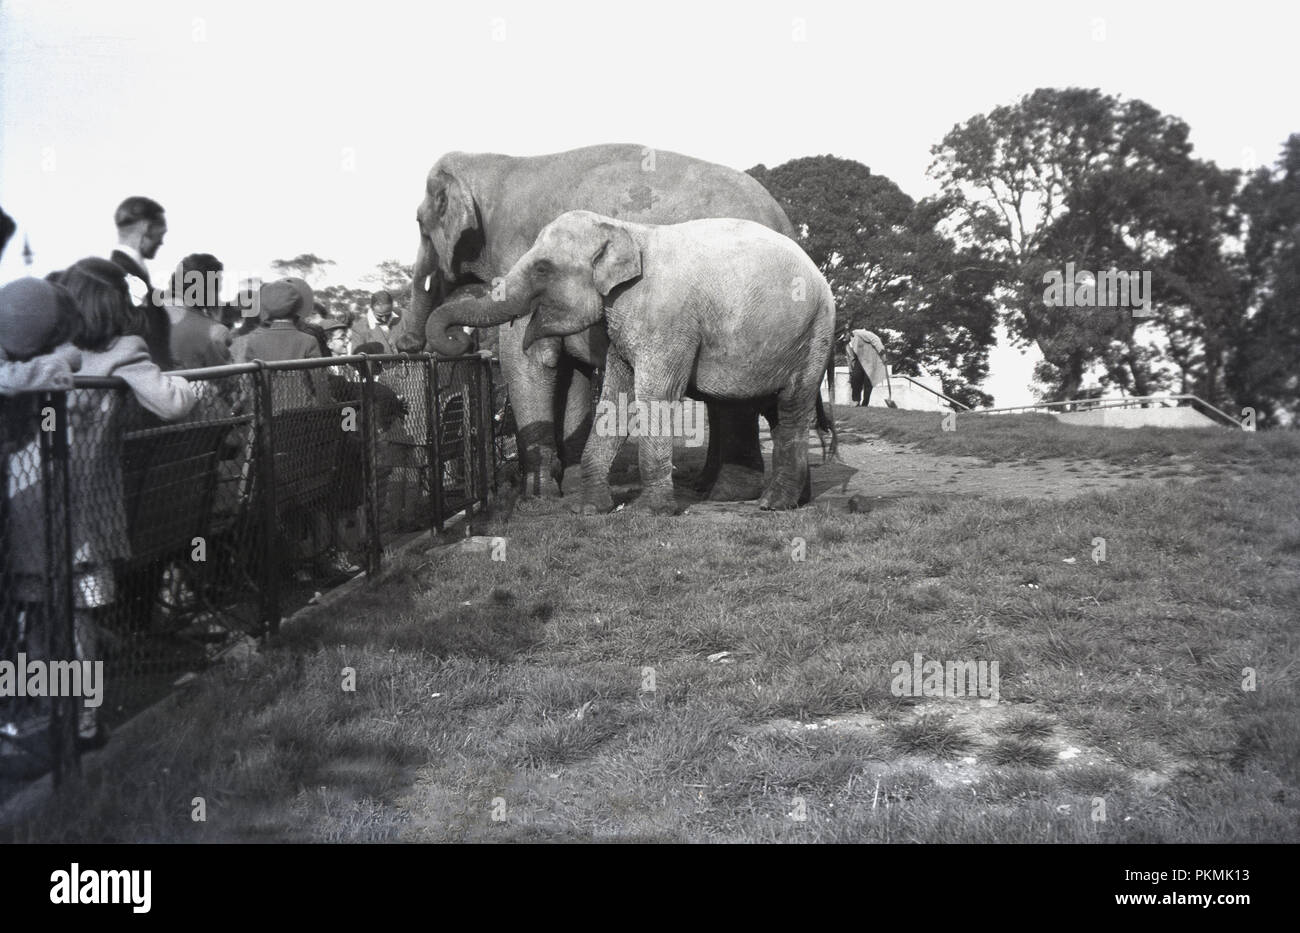 Historical, 1920s, visitors to a zoo get up close to two elephants, England, UK. Due to peoples fascination with elephants, these magnificent animals have long been a top attraction at zoos and in this picture, only a small fence is between them and the general public, who liked to feed them treats. Stock Photo